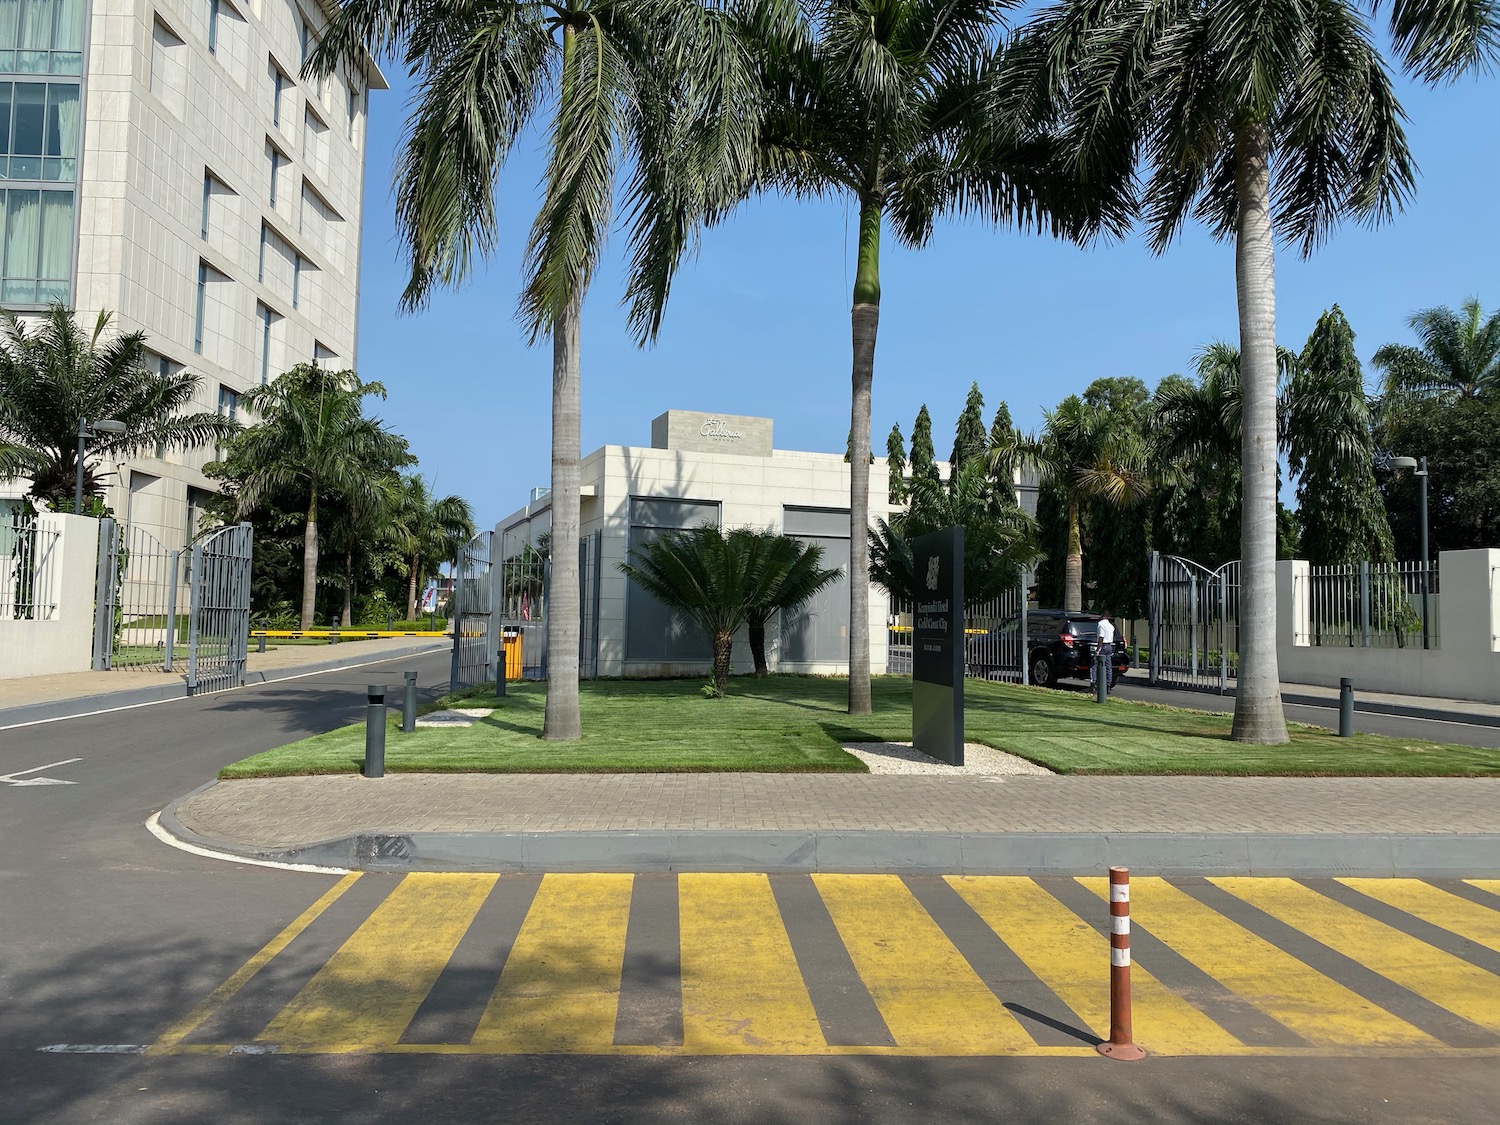 a building with palm trees and a zebra crossing